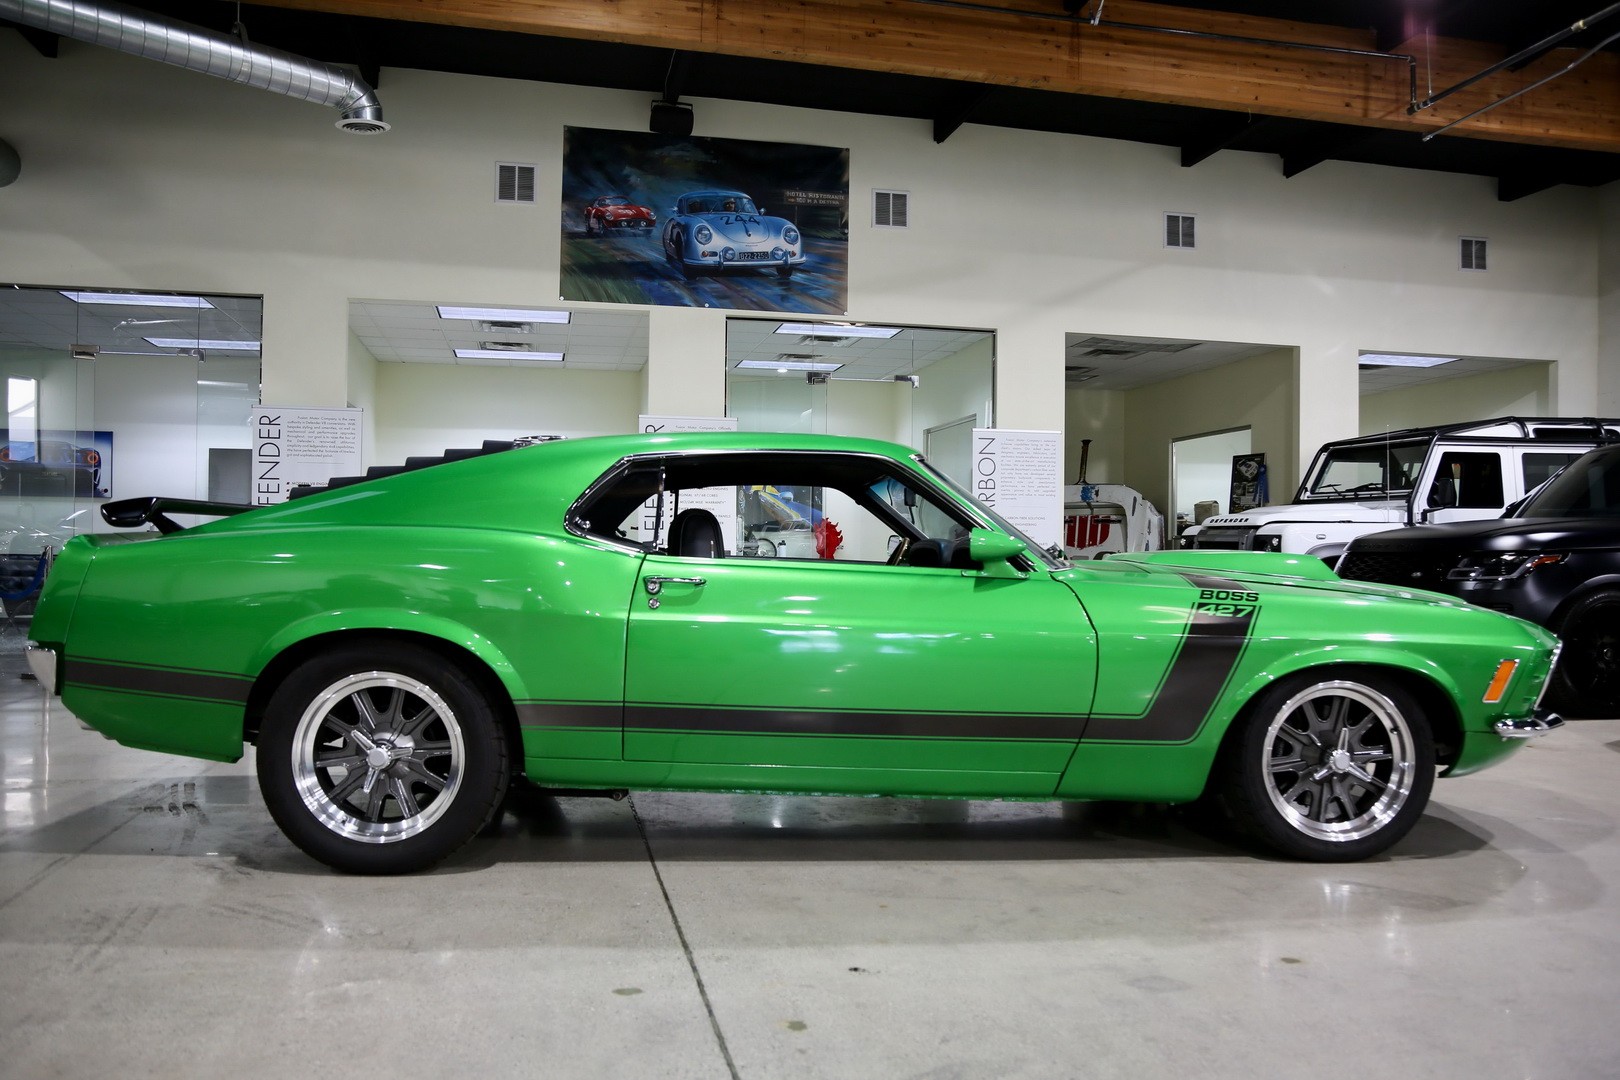 Custom Ford Fastback Boss 427 Is a Fully Savage Beast, Costs - autoevolution